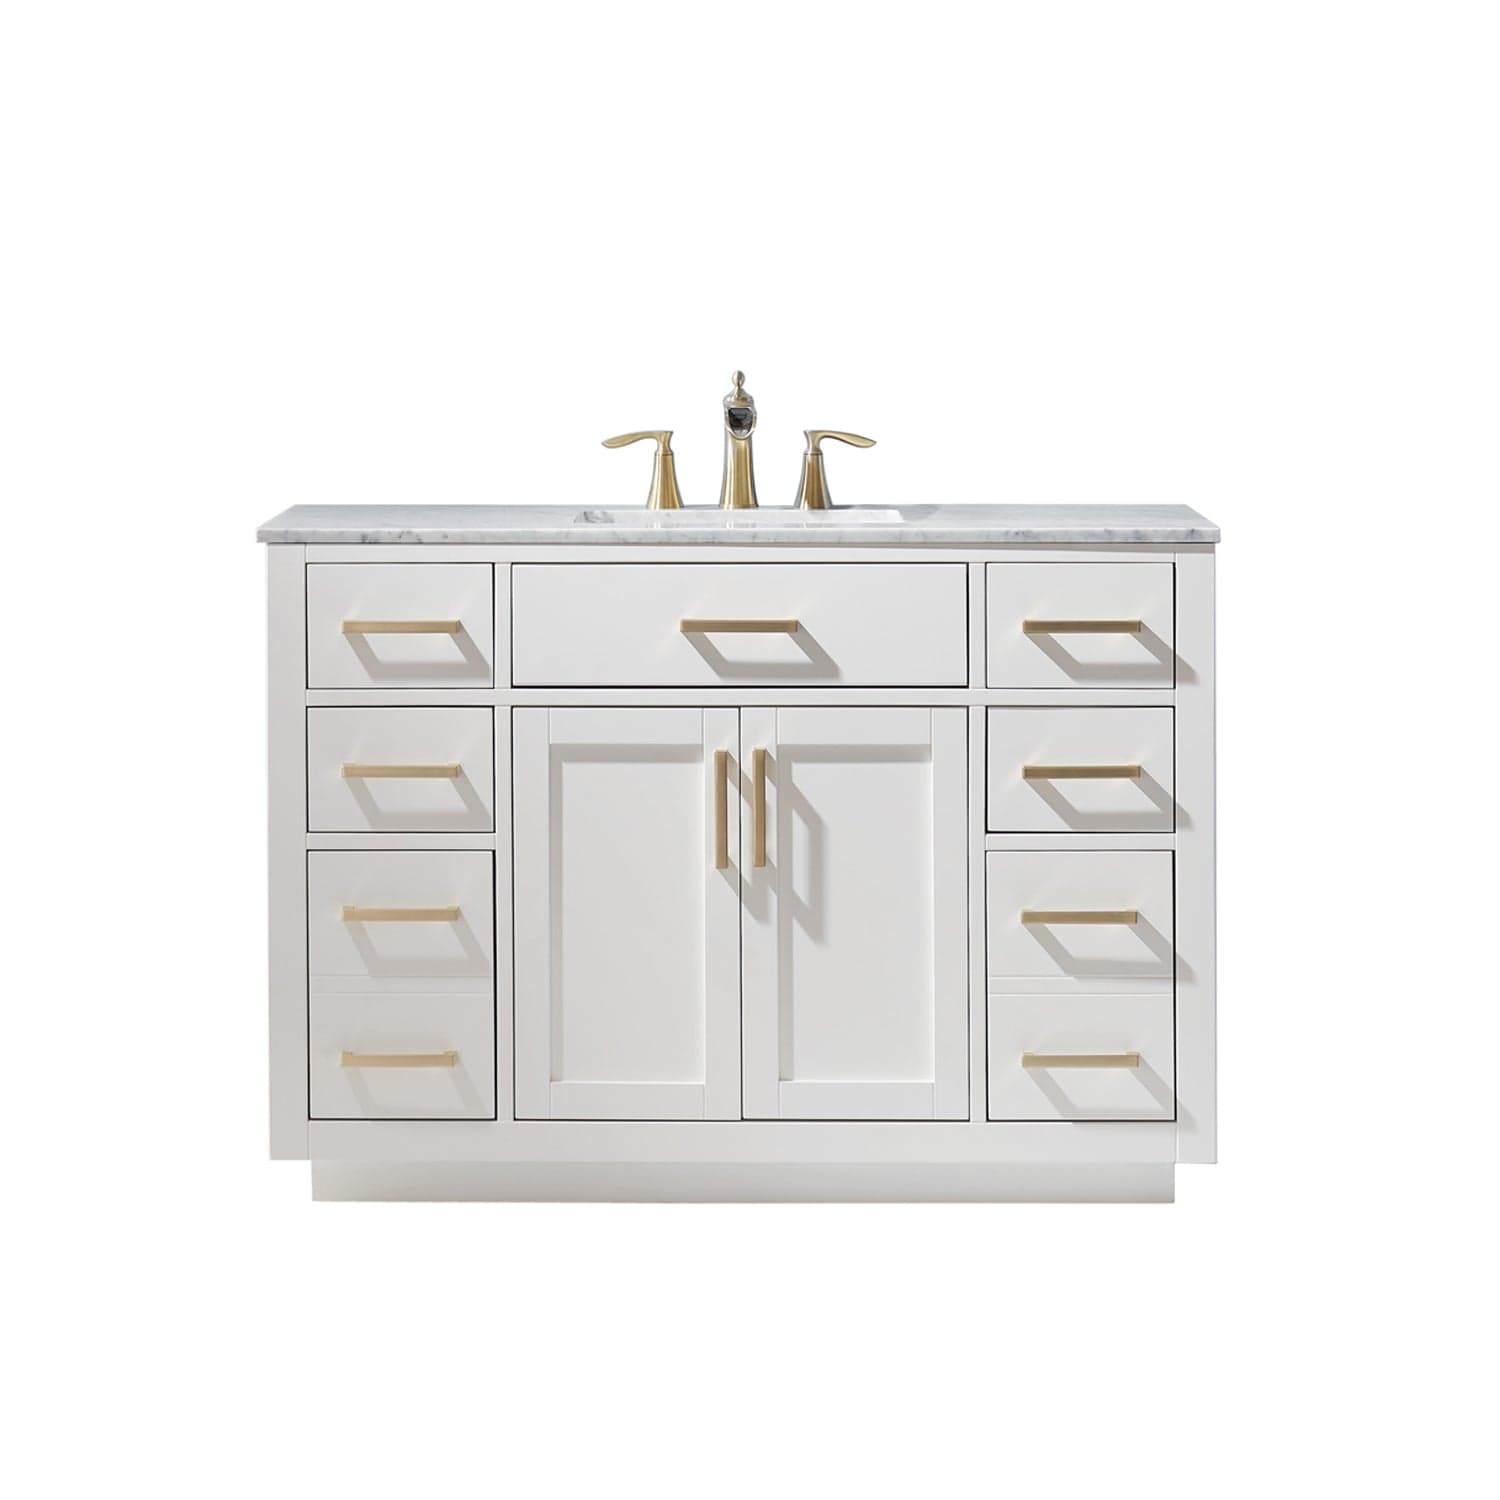 Altair Ivy 48" Single Bathroom Vanity Set in White and Carrara White Marble Countertop without Mirror 531048-WH-CA-NM - Molaix631112971201Vanity531048-WH-CA-NM